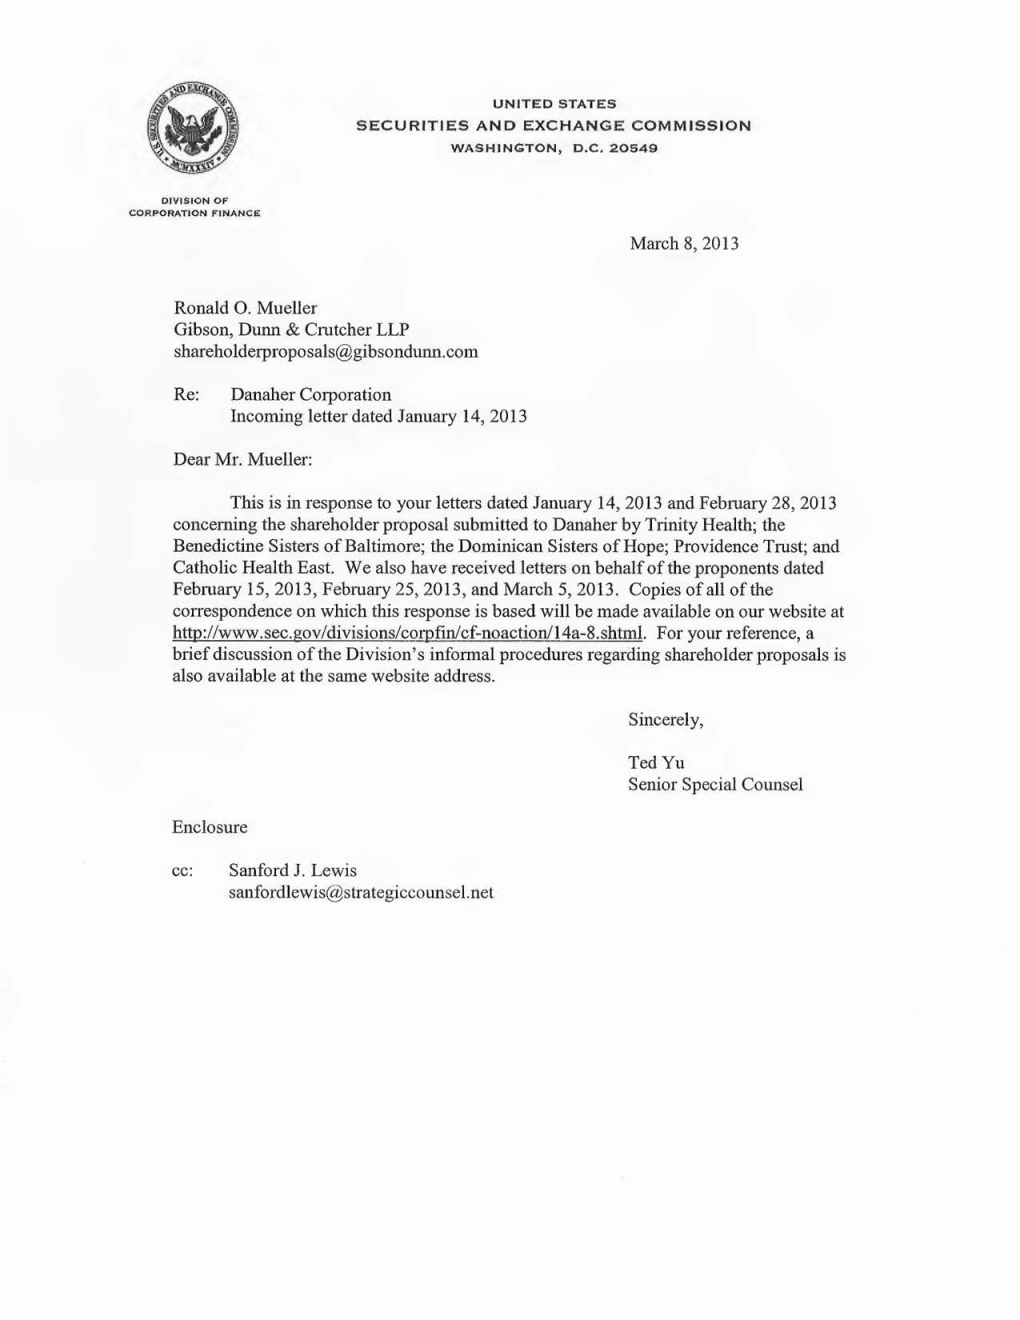 Danaher Corporation Incoming Letter Dated January 14, 2013